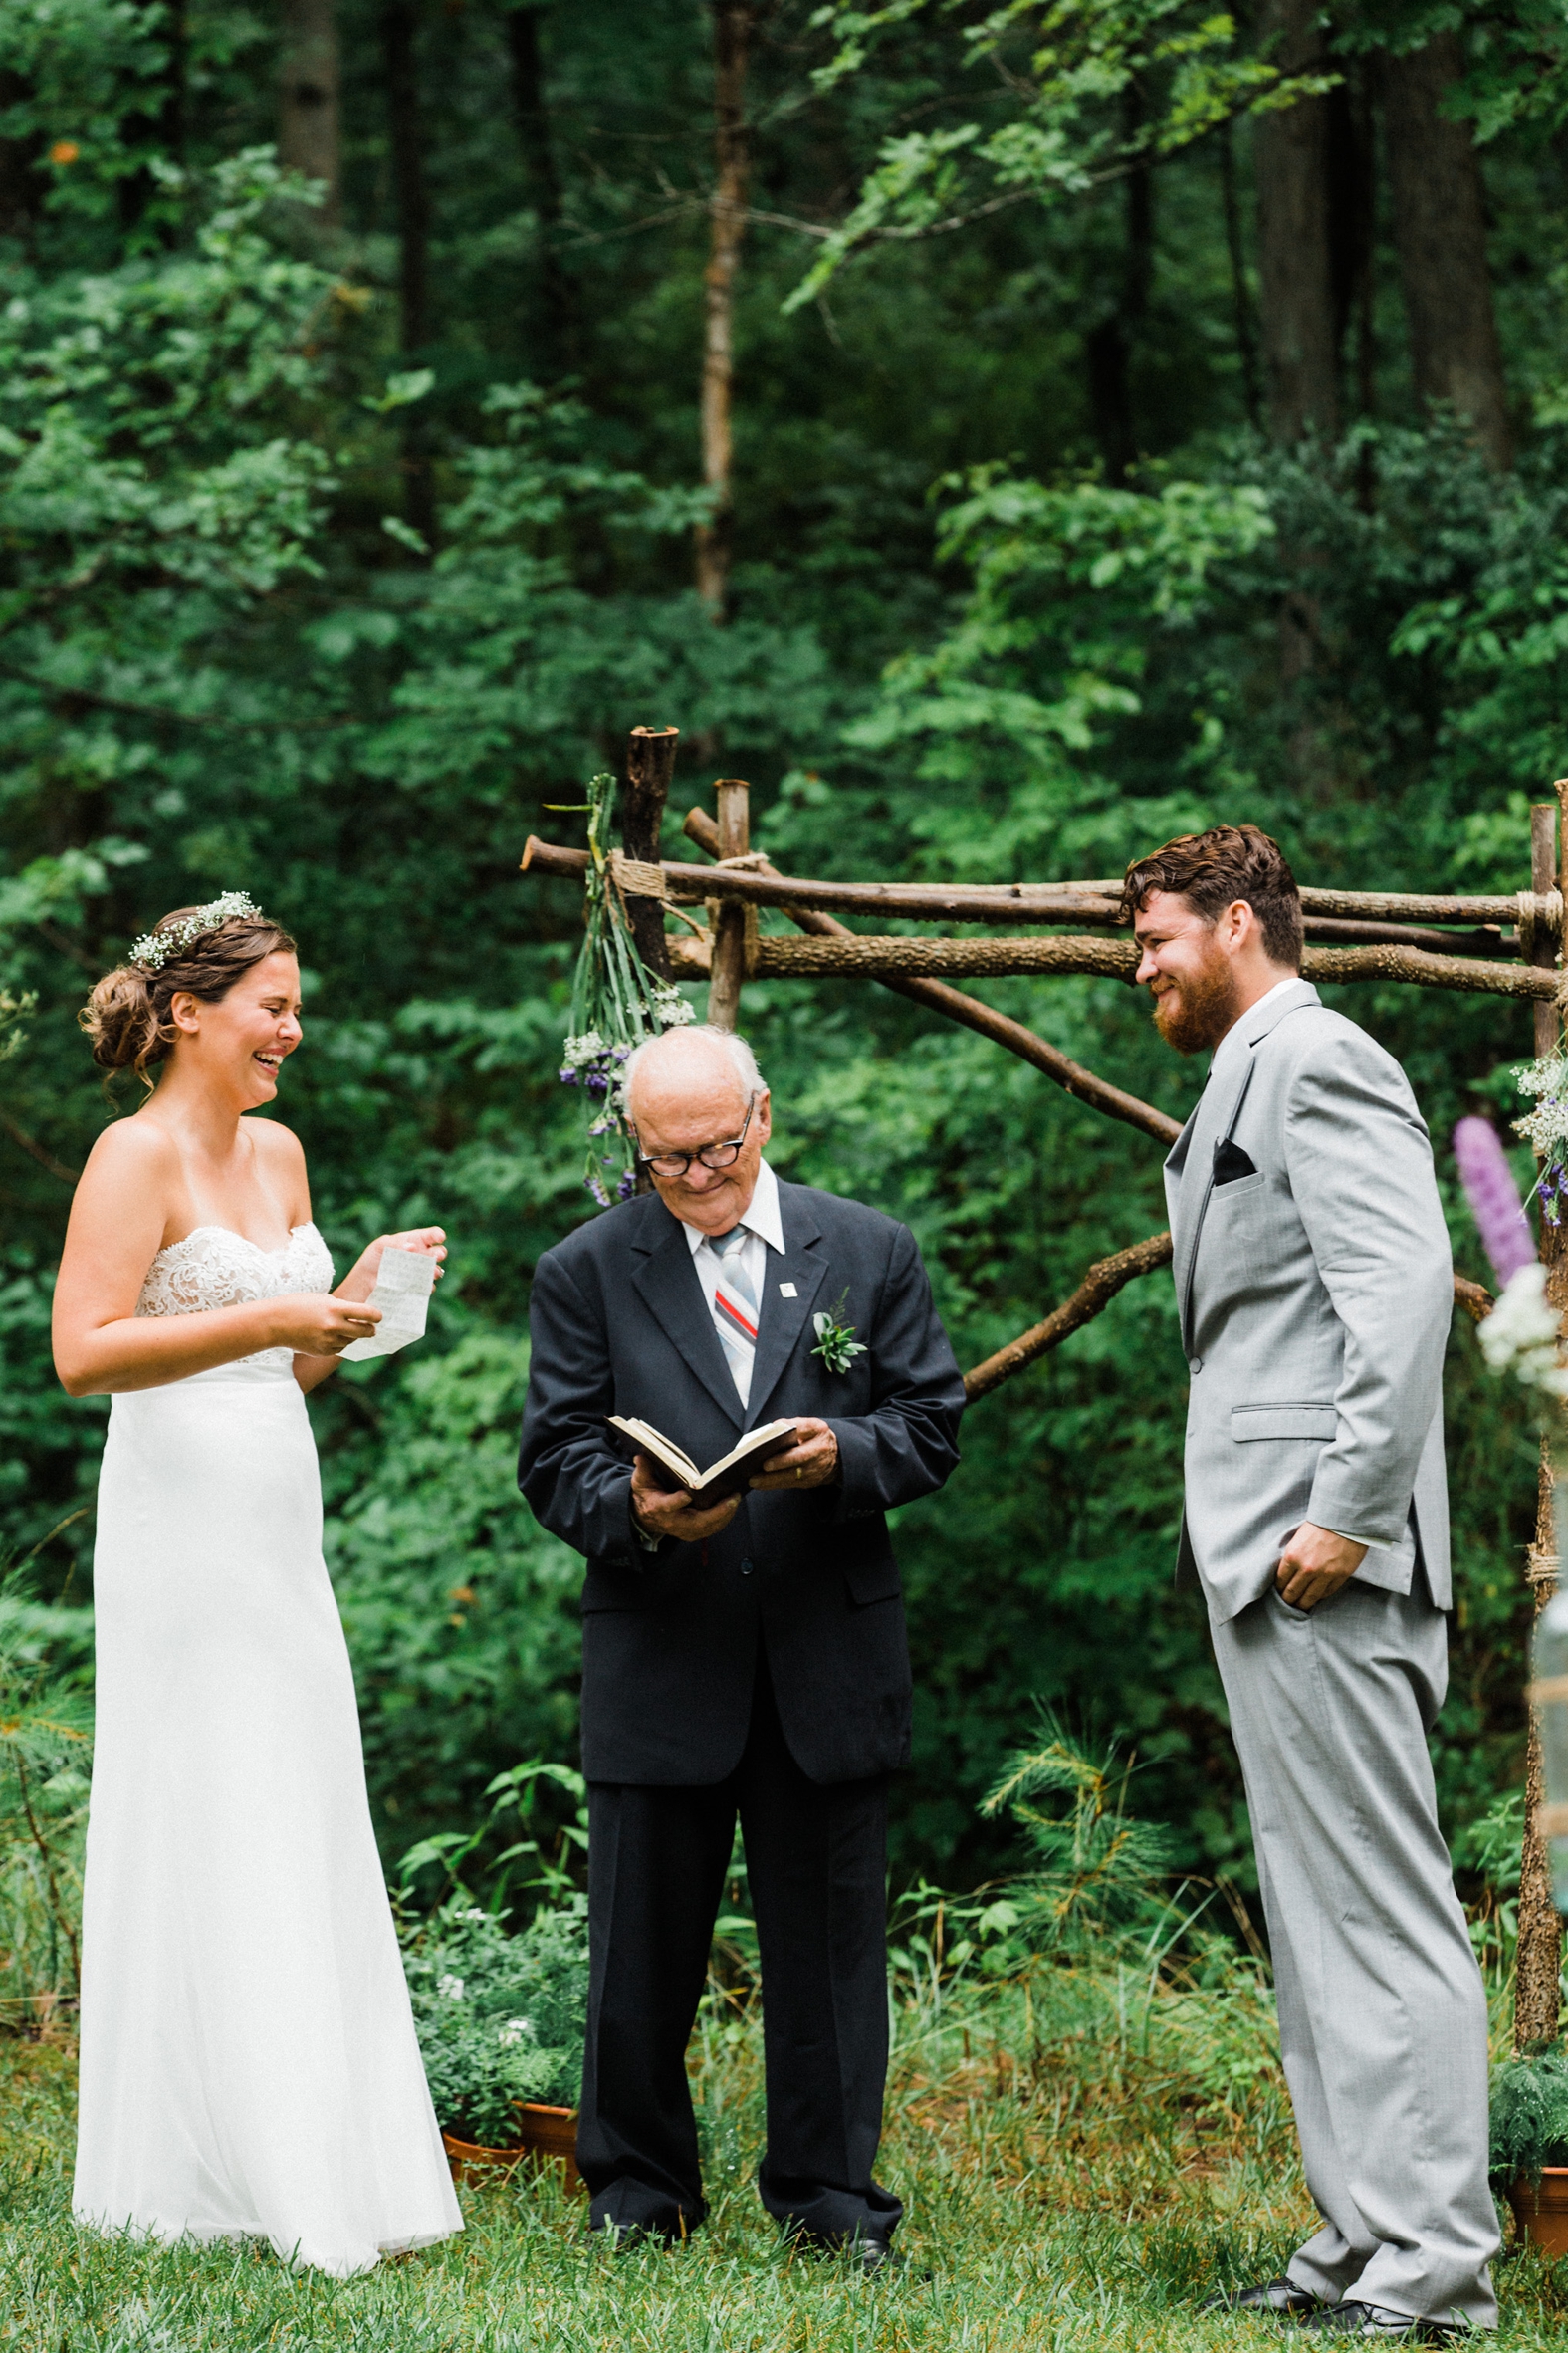 Bride and groom reading vows in outdoor wedding ceremony at Little Piney Lodge in Hermann Missouri (MO)